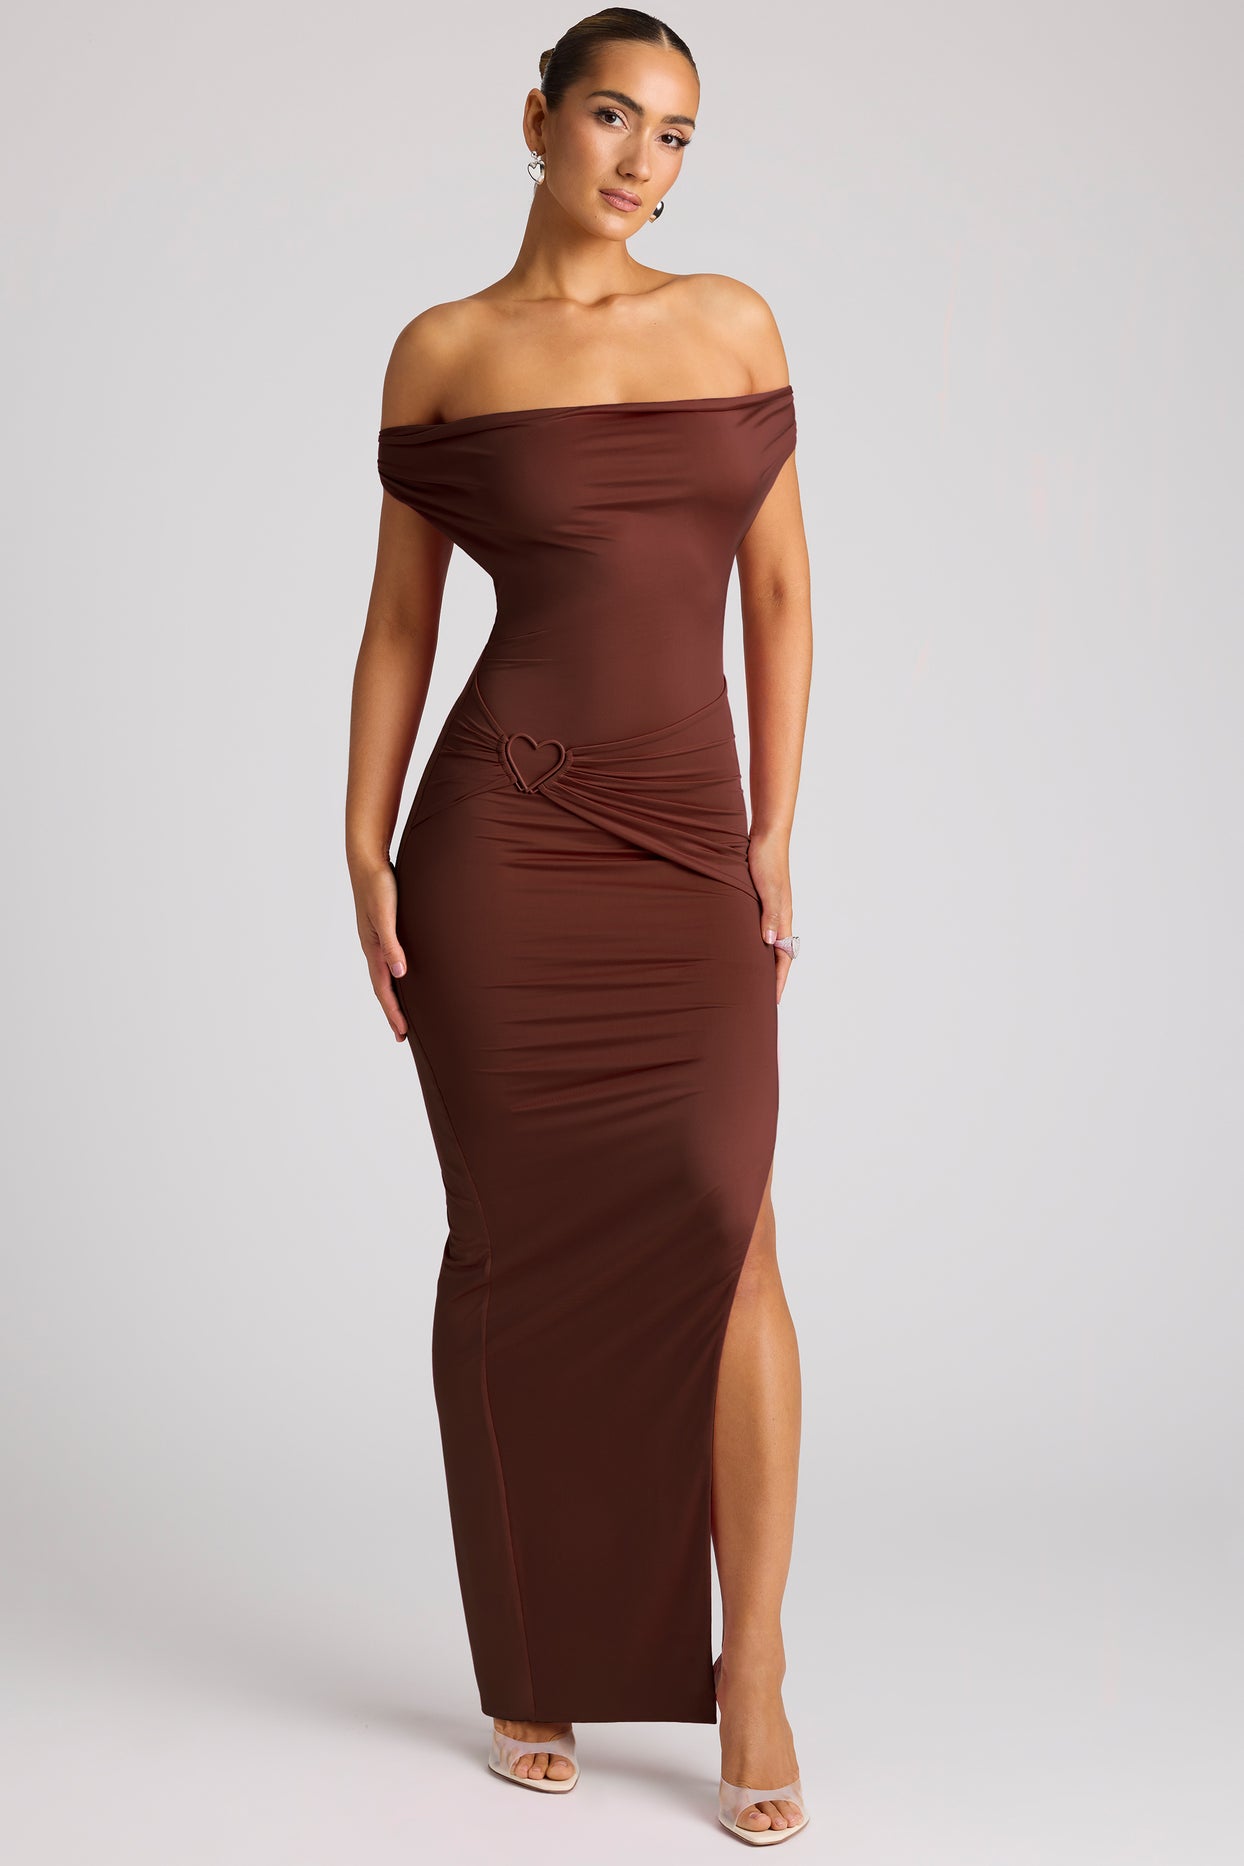 Multiwear Cowl Neck Wrap Over Evening Gown in Chocolate Brown